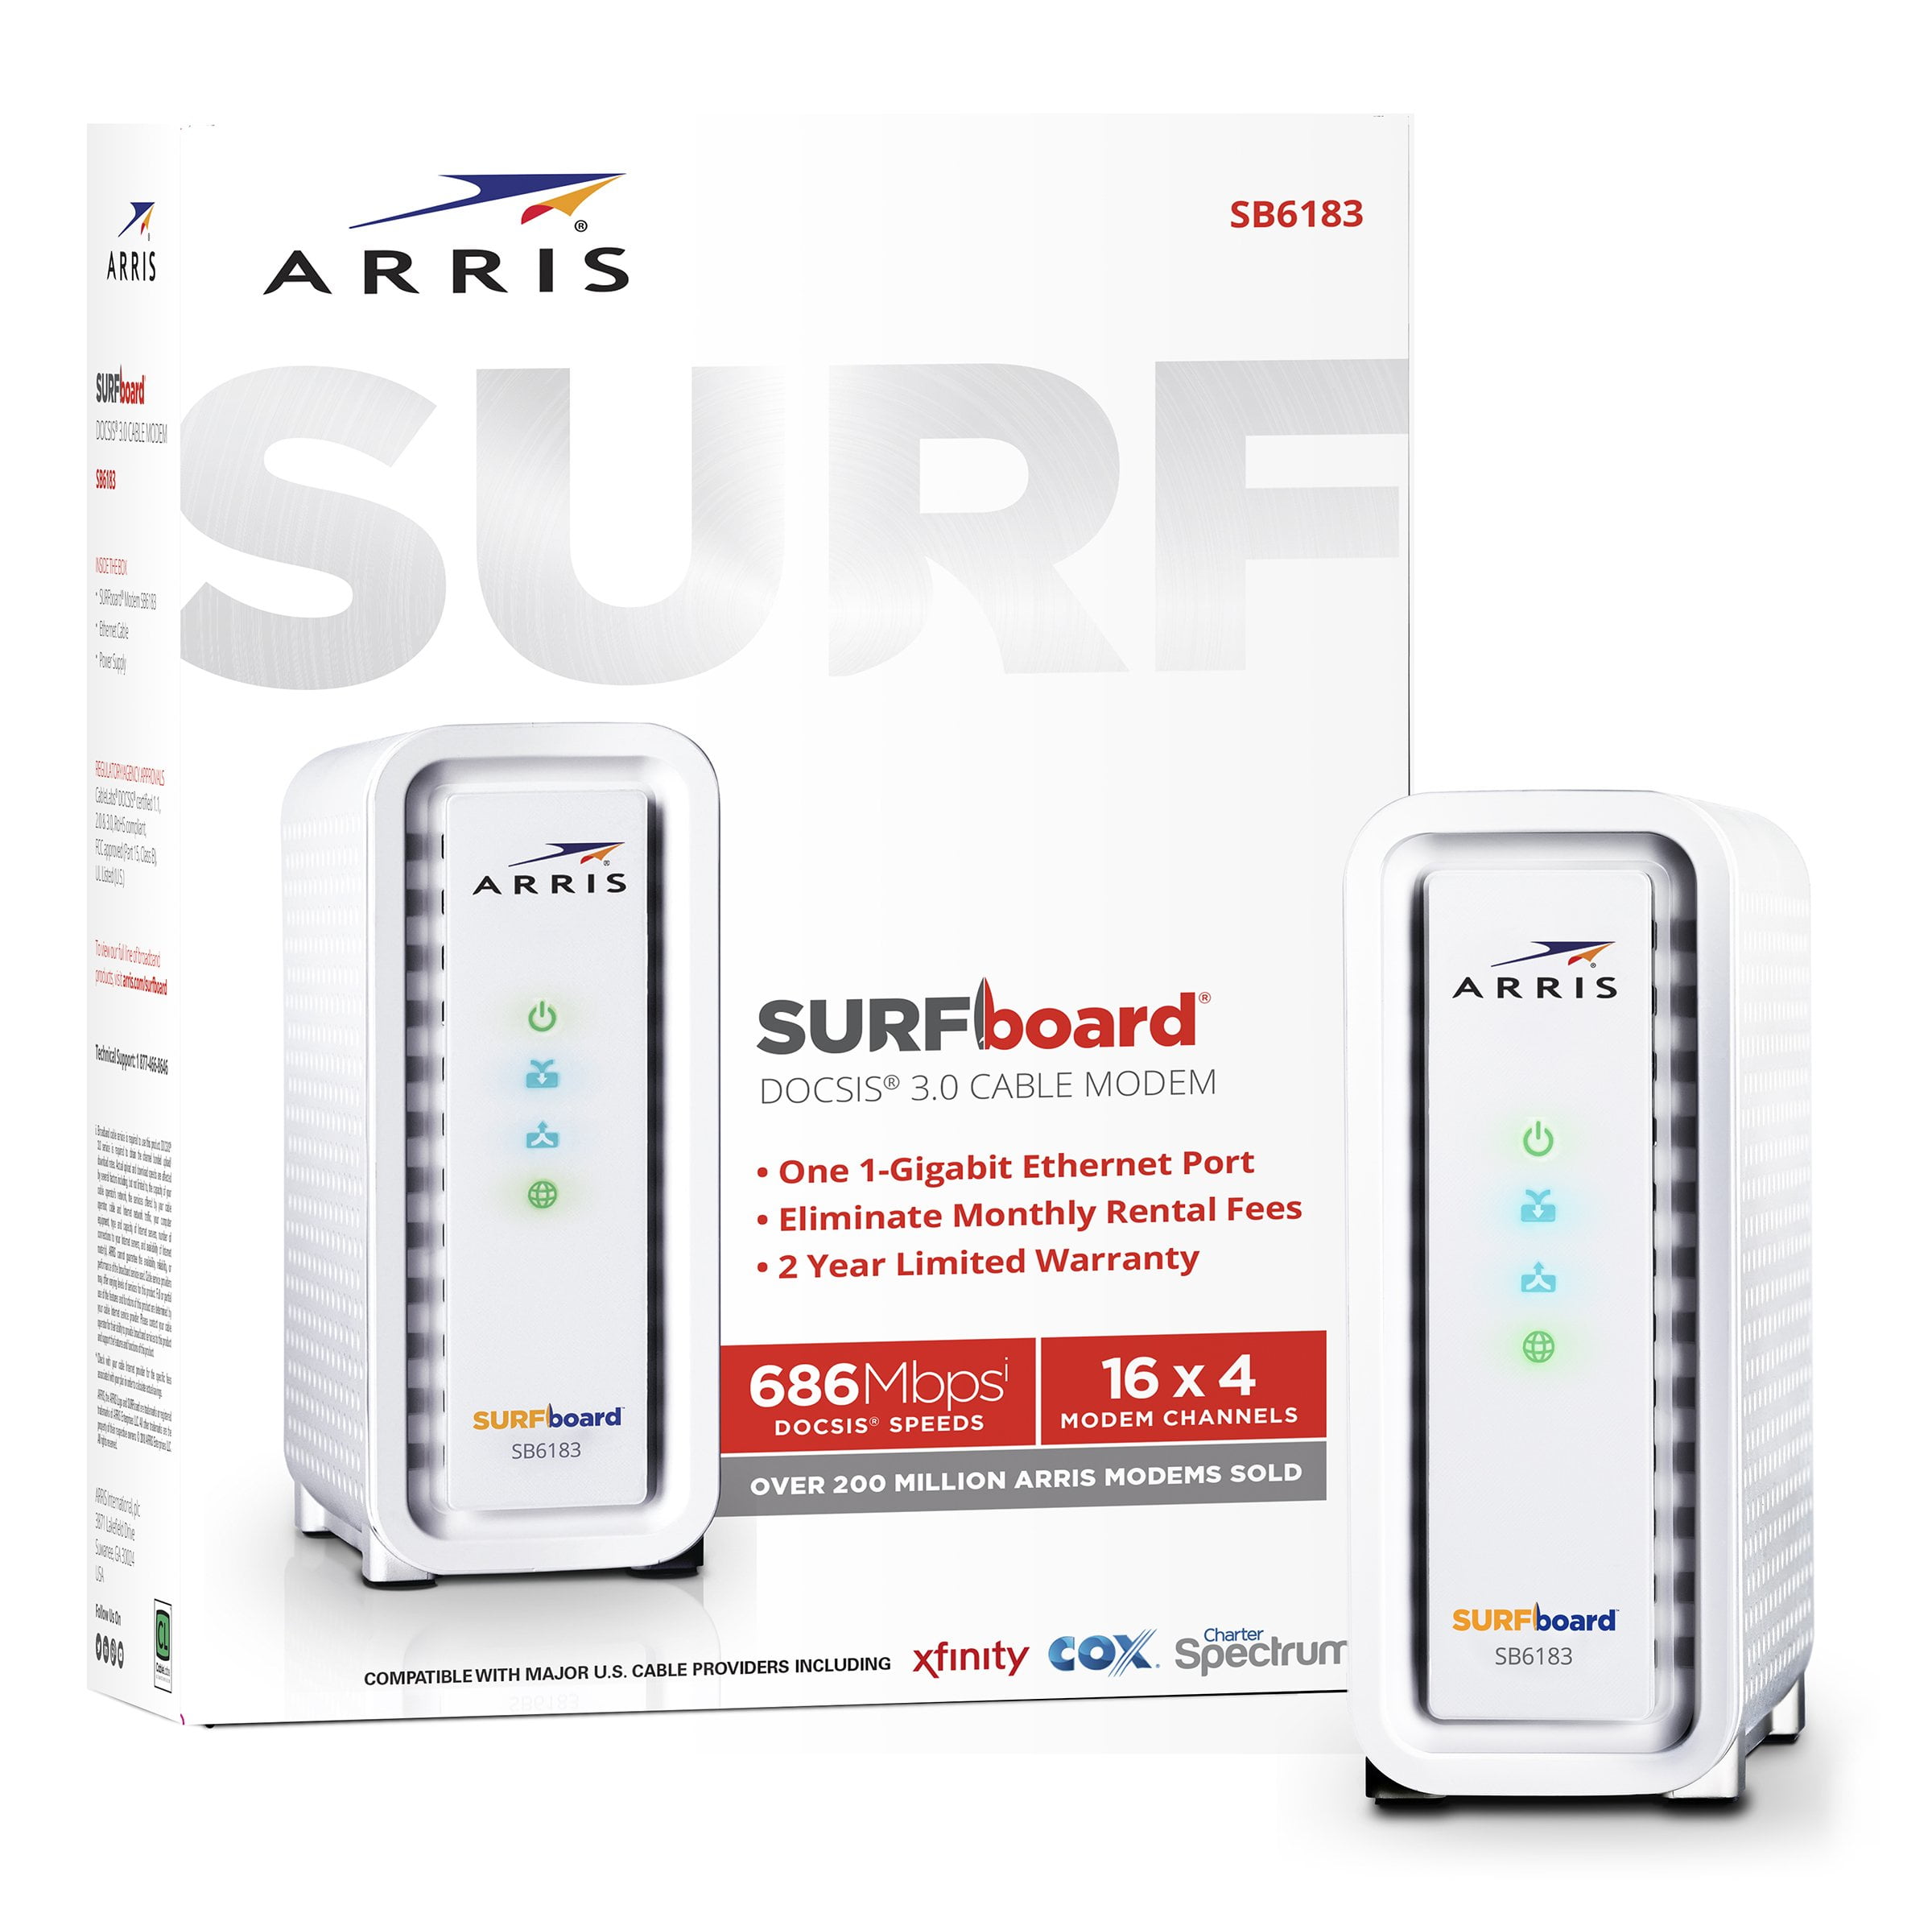 ARRIS Surfboard (16x4) DOCSIS 3.0 Cable Modem, 686 Mbps Max Speed,  Certified for Comcast Xfinity, Spectrum, Cox, Cablevision & More (SB6183  White)